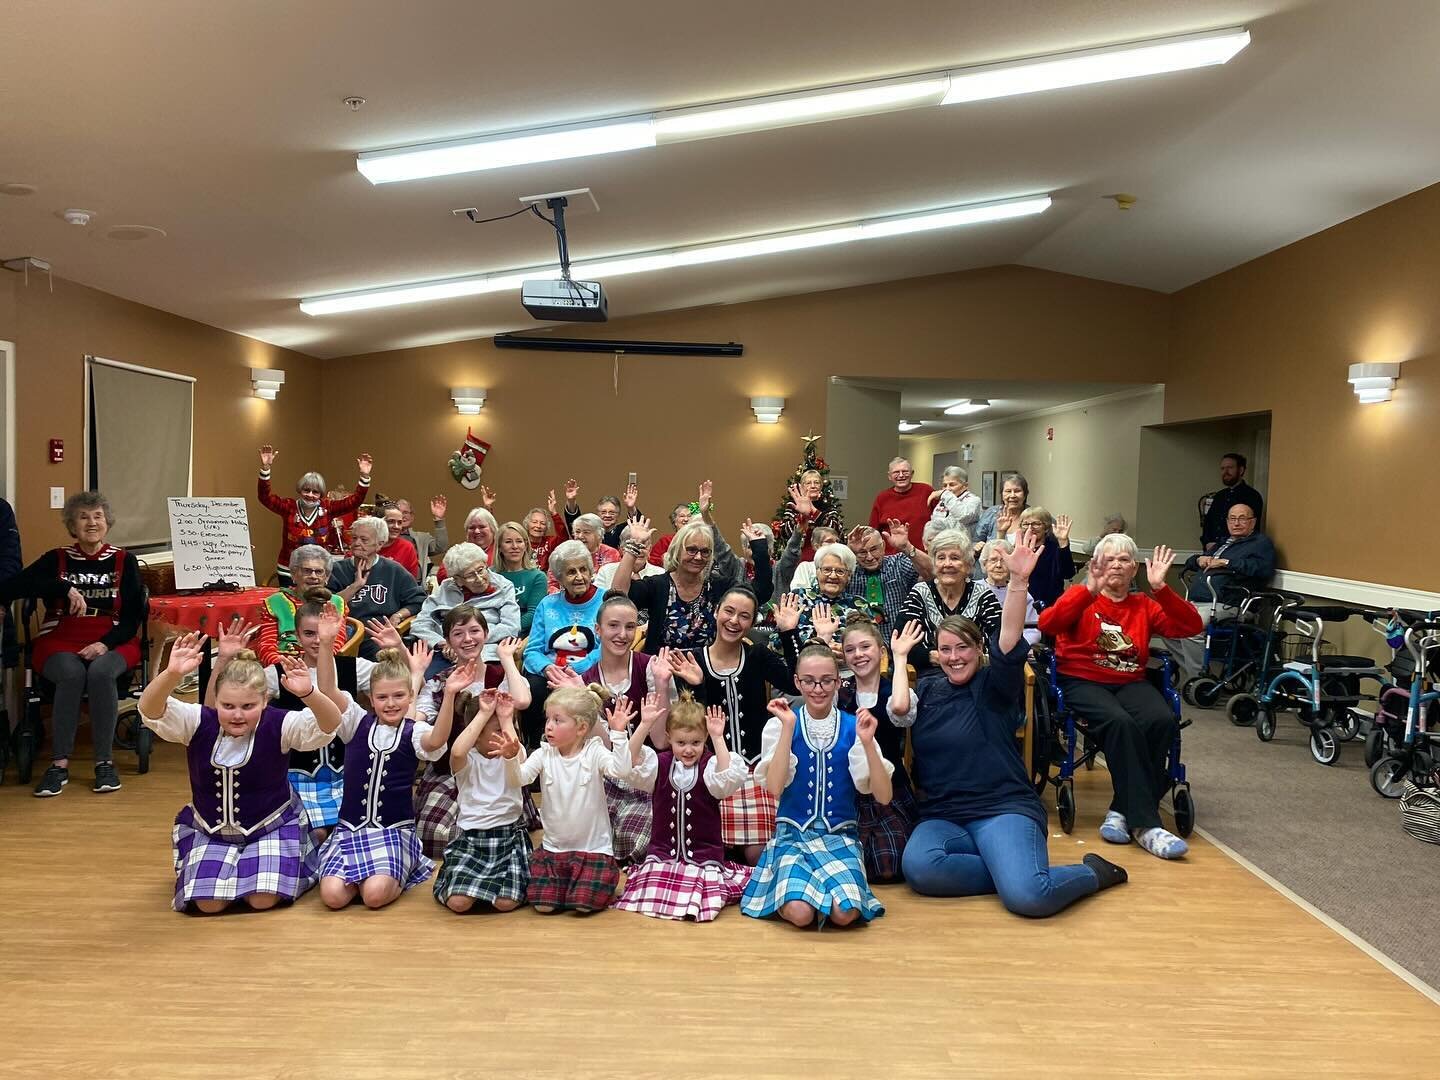 Tonight we performed at Gardenview in Kimberley! We had so many residents that came out to watch! Thank you to dancers and parents for taking the time this week to perform for our communities!